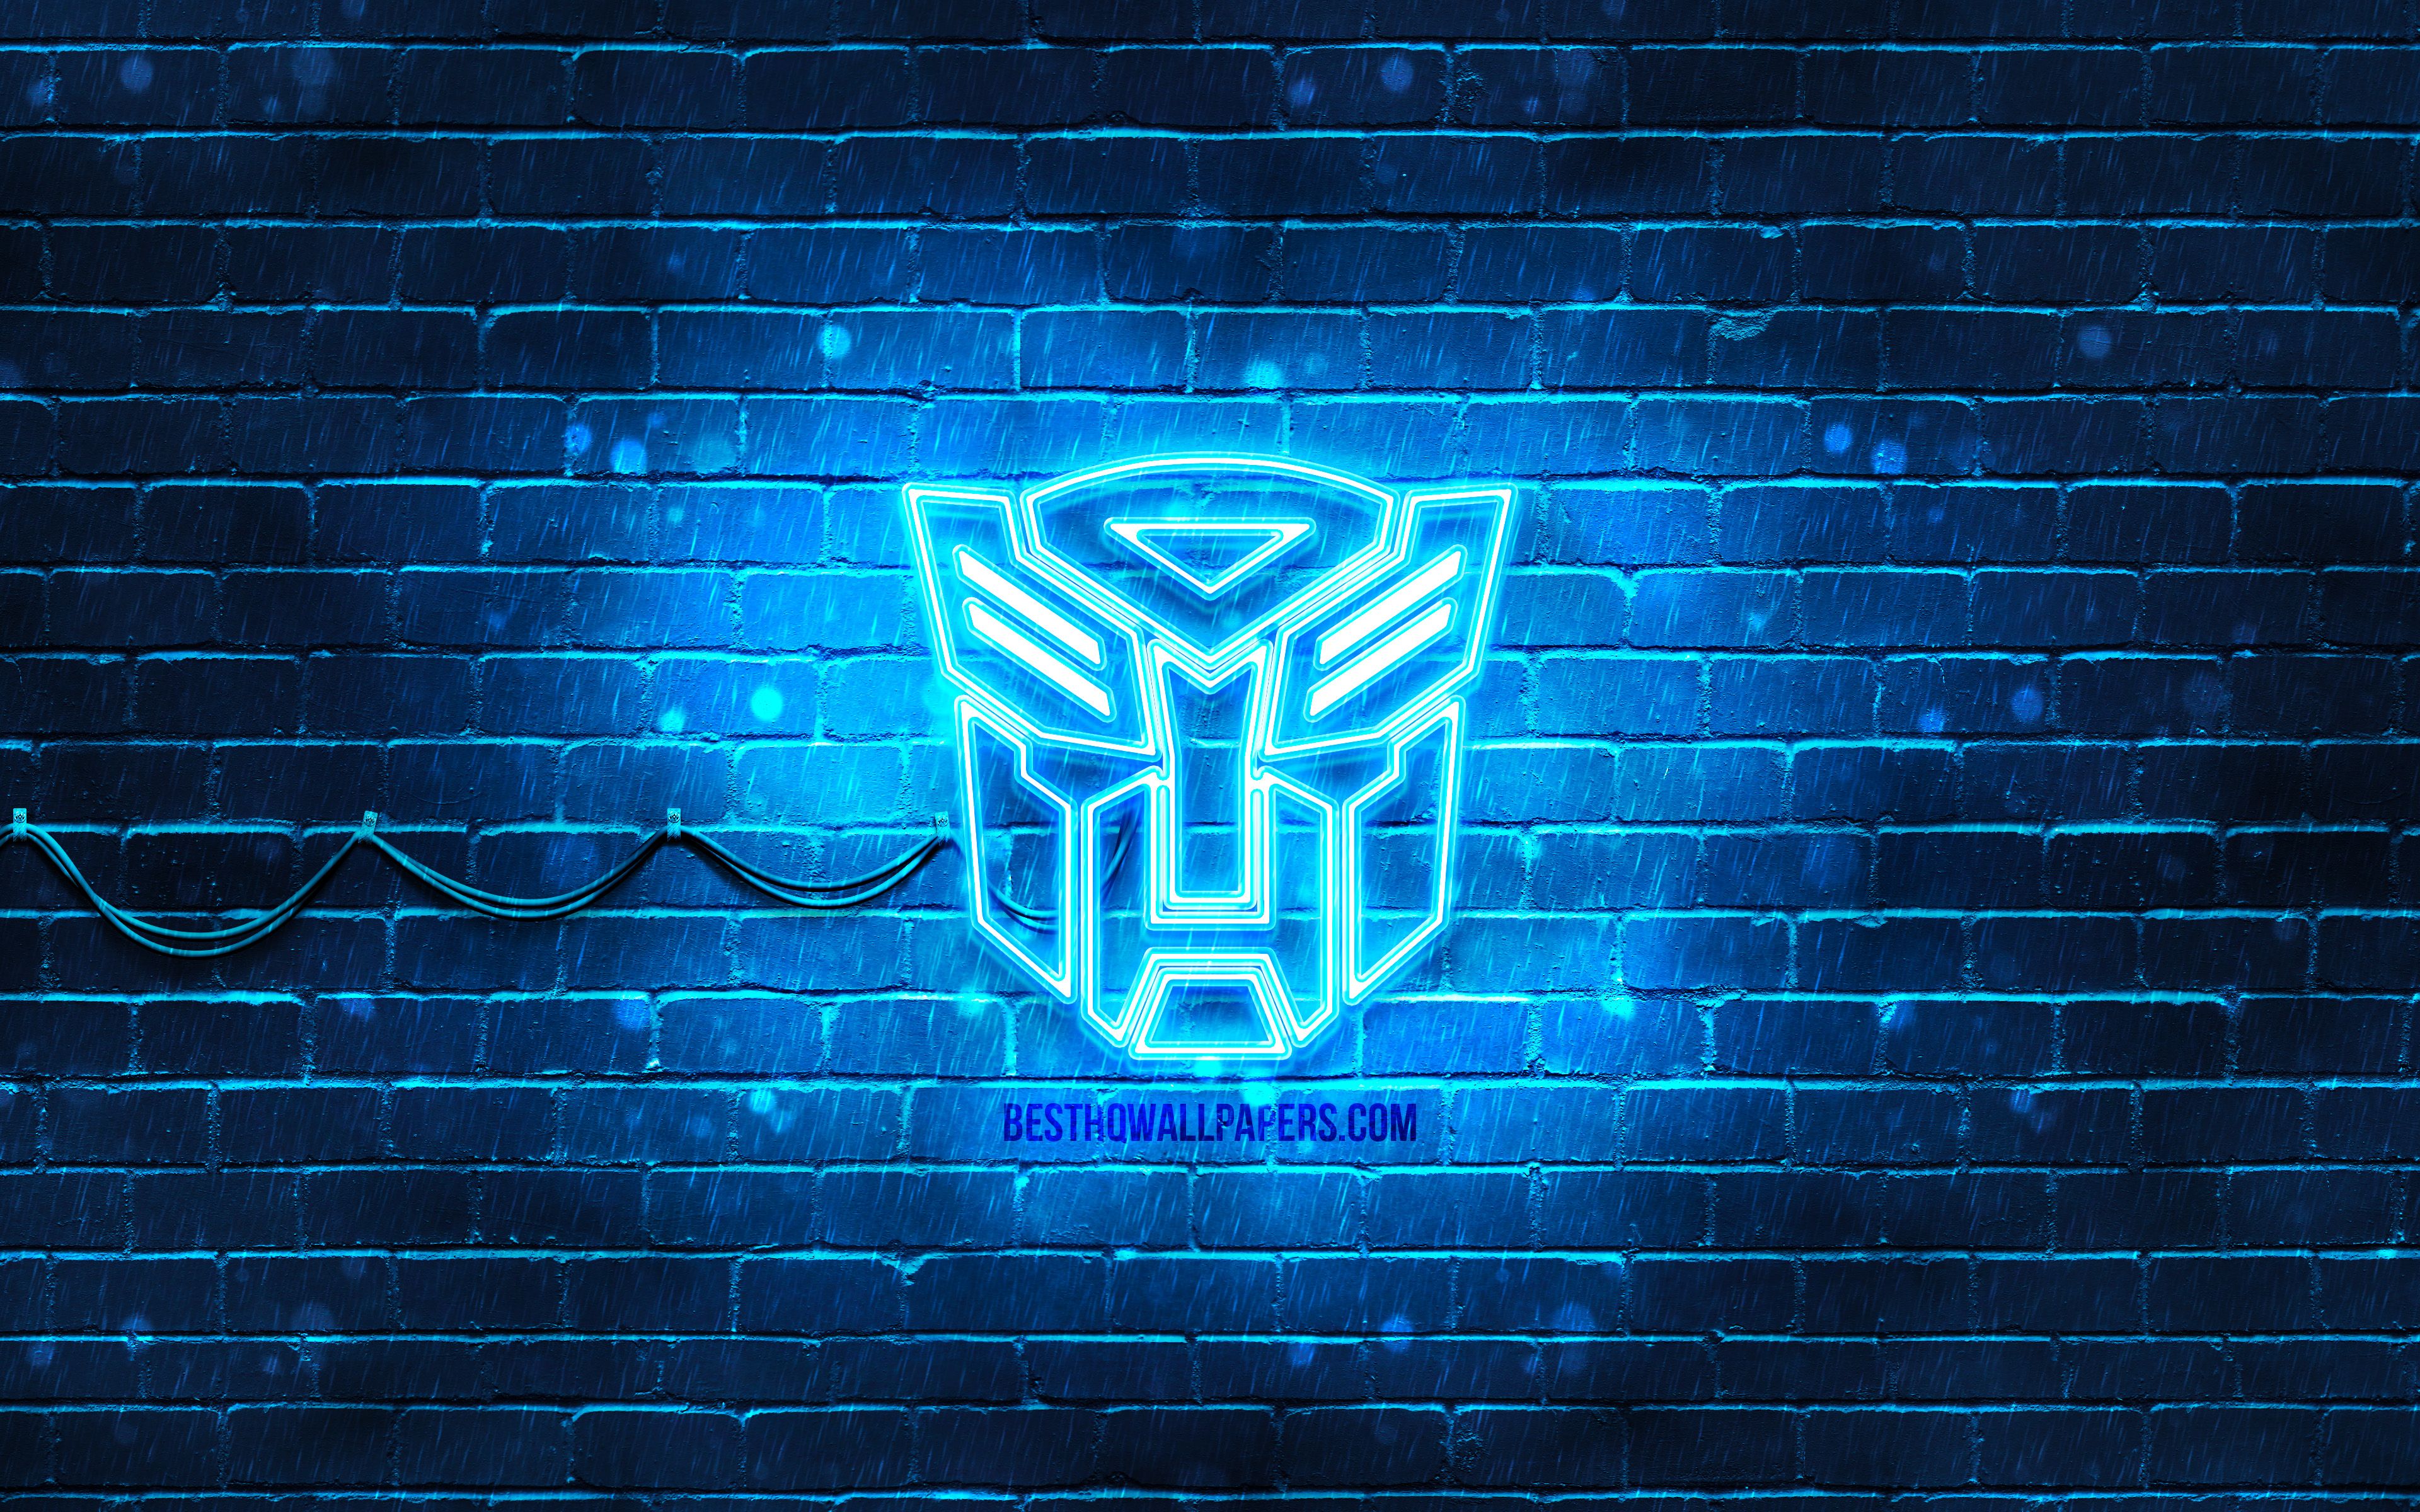 Download wallpaper Transformers blue logo, 4k, blue brickwall, Transformers logo, movies, Transformers neon logo, Transformers for desktop with resolution 3840x2400. High Quality HD picture wallpaper